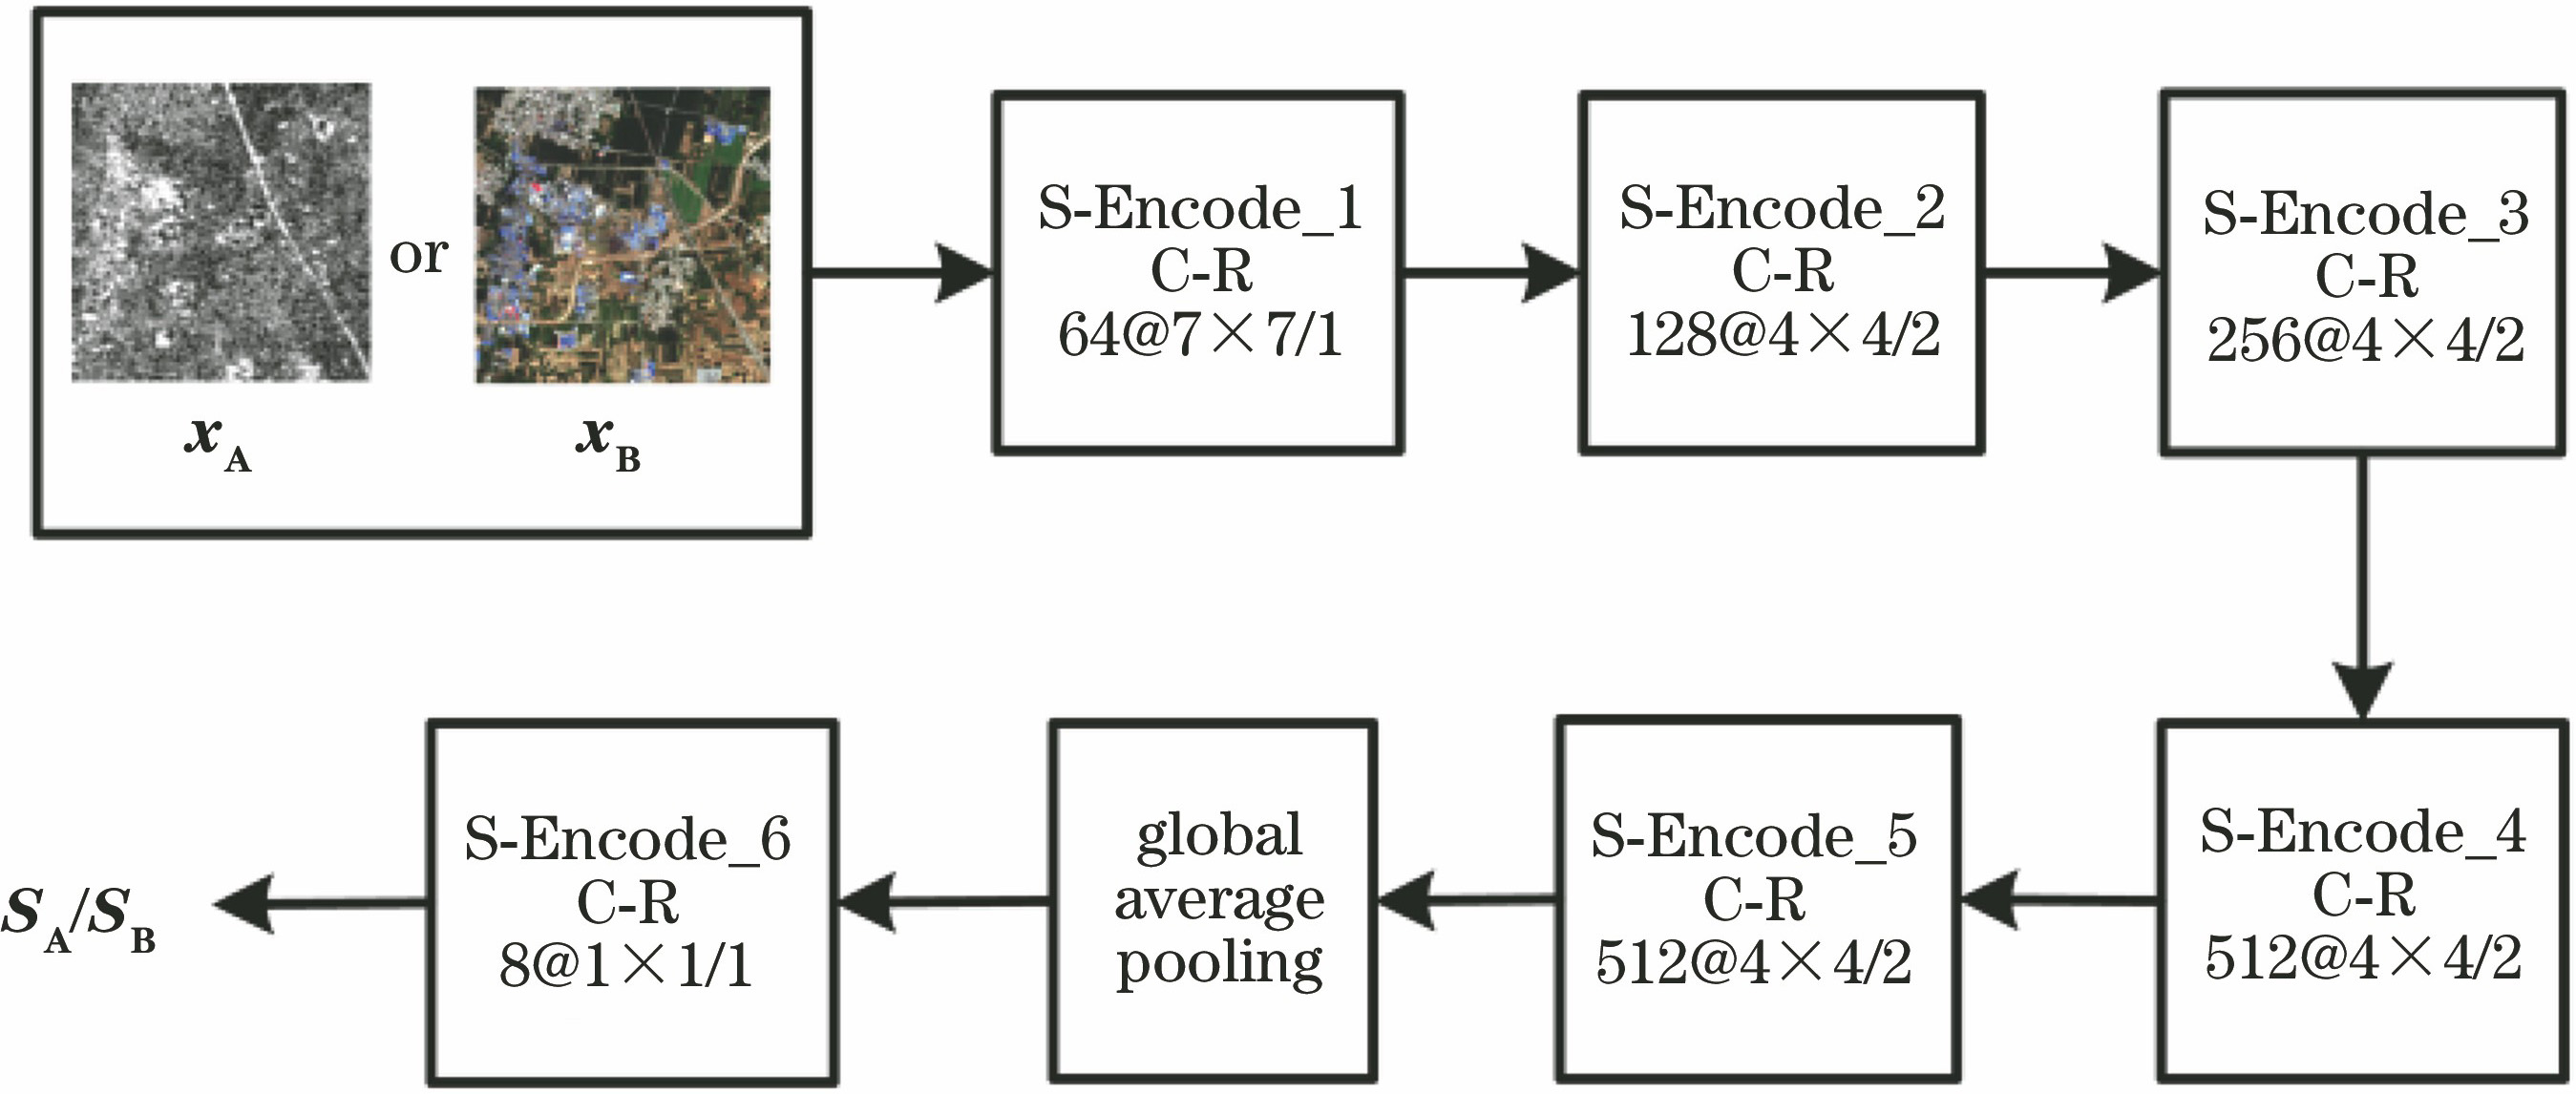 Network structure of style encoder